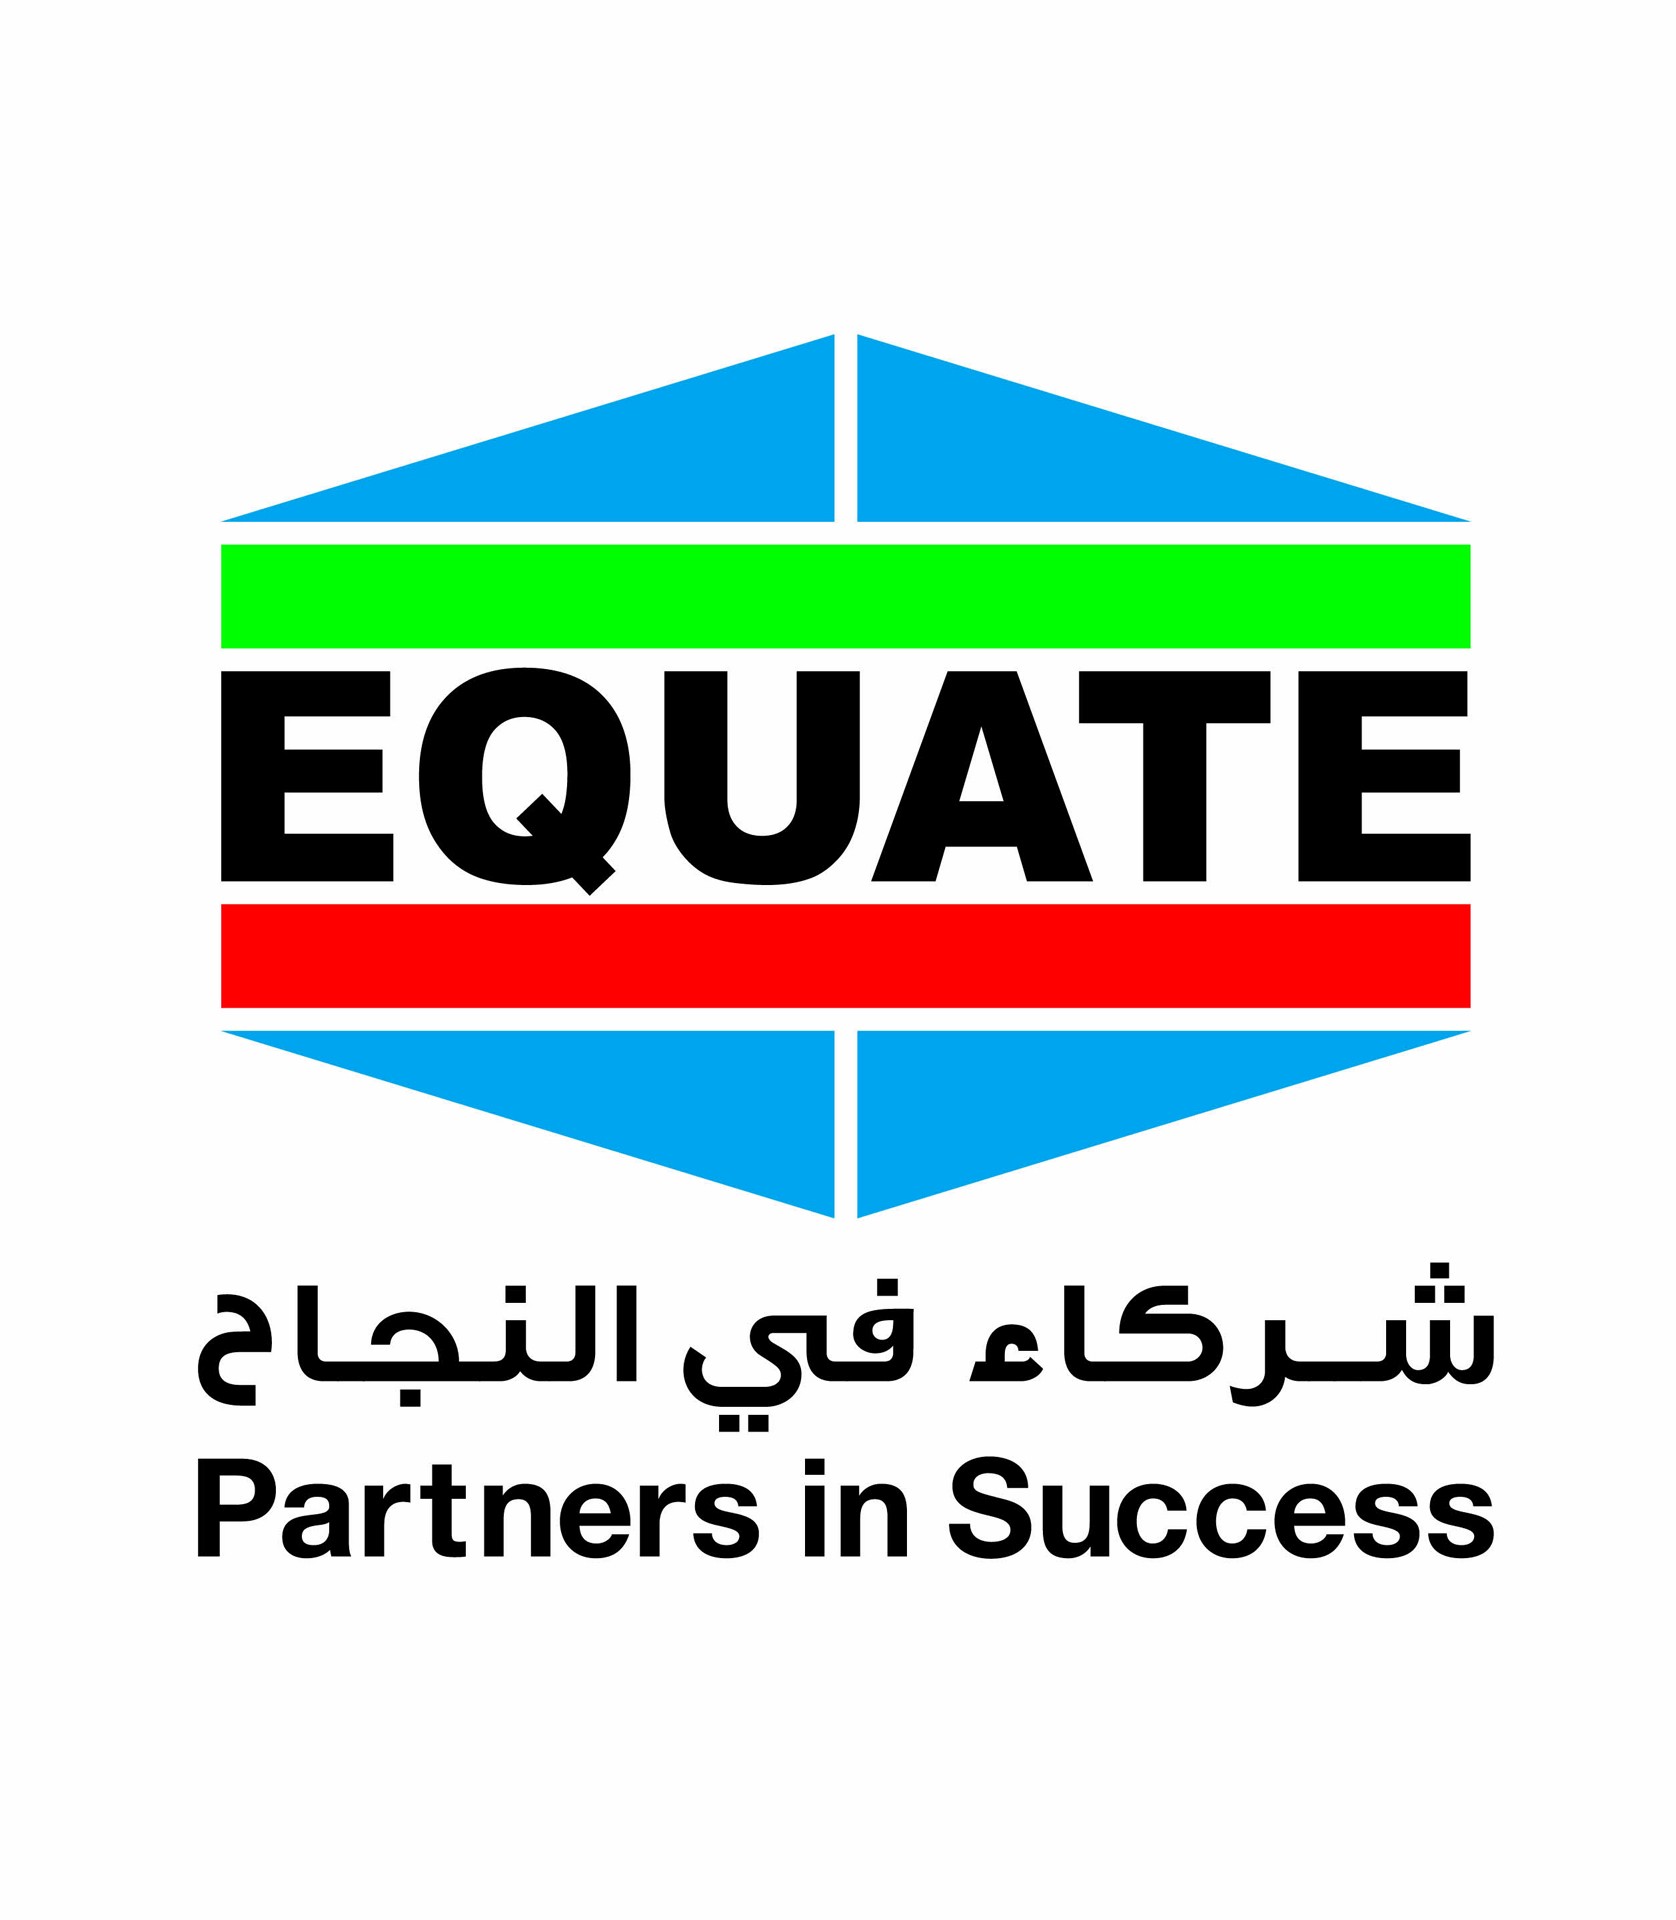 EQUATE Group announces financial results for 2017, reporting a net profit of USD 1.13 billion for the year